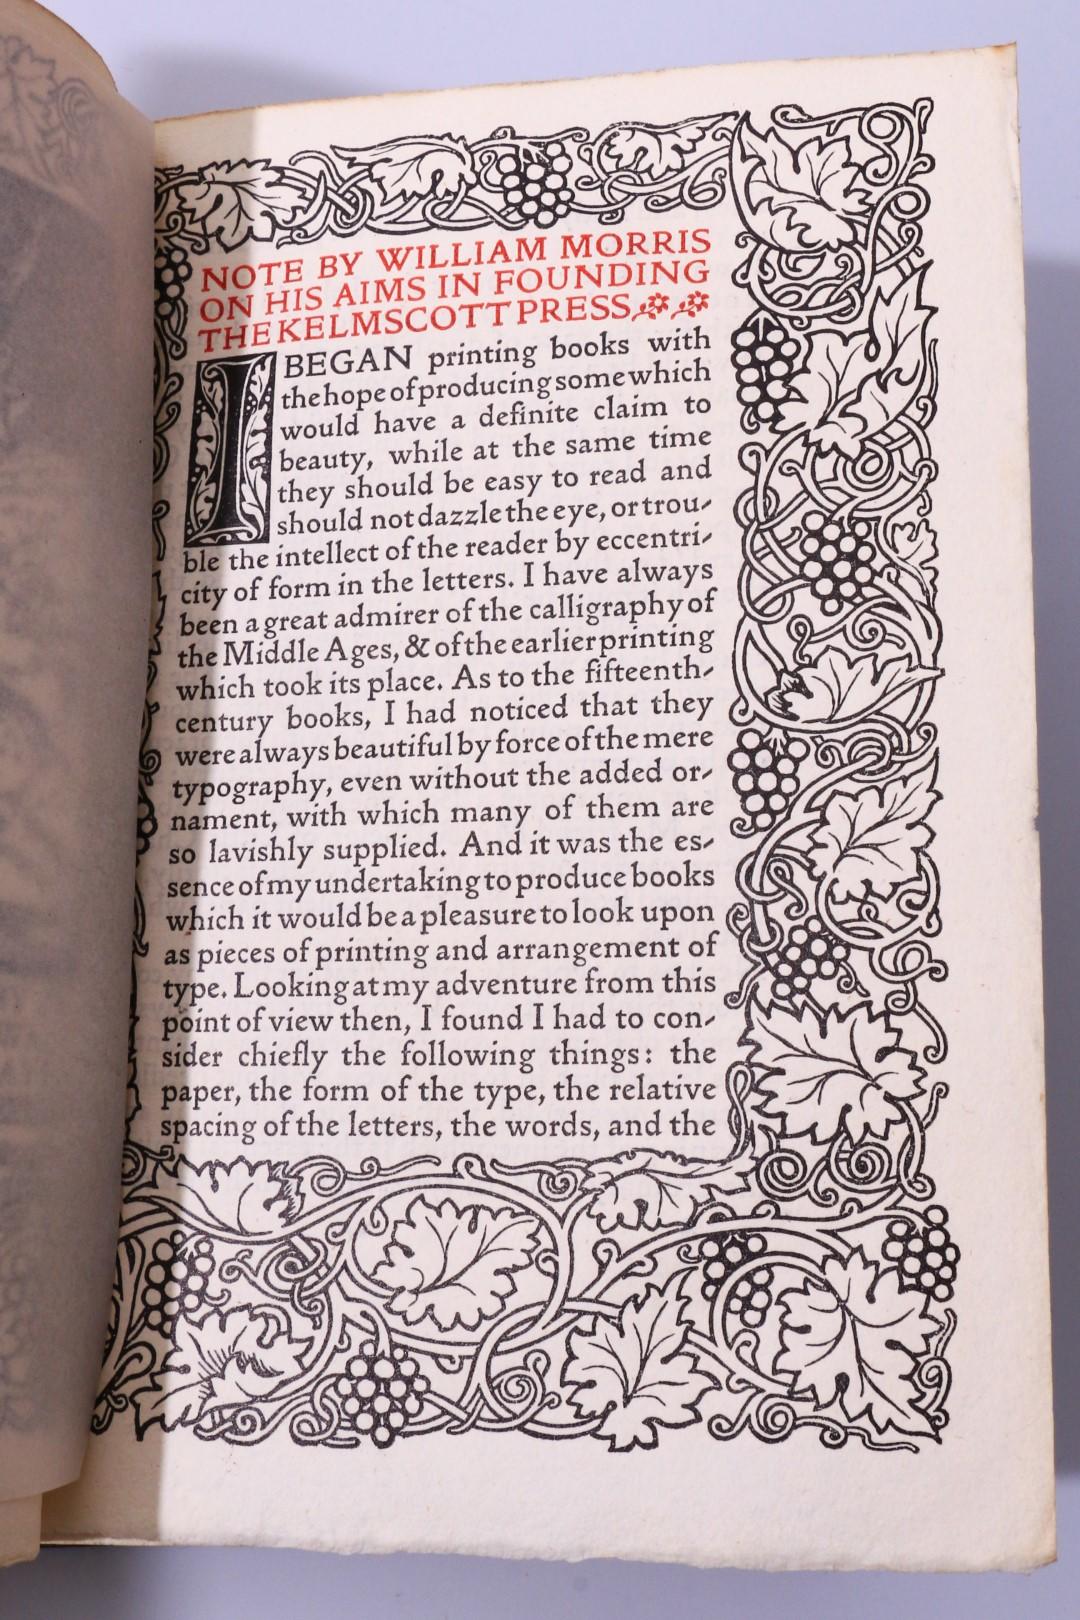 William Morris - A Note by William Morris on his Aims in Founding the Kelmscott Press, Together with a Short Description of the Press by S.C. Cockerell, & an Annotated List of the Books Printed Thereat. - Kelmscott Press, 1898, Limited Edition.